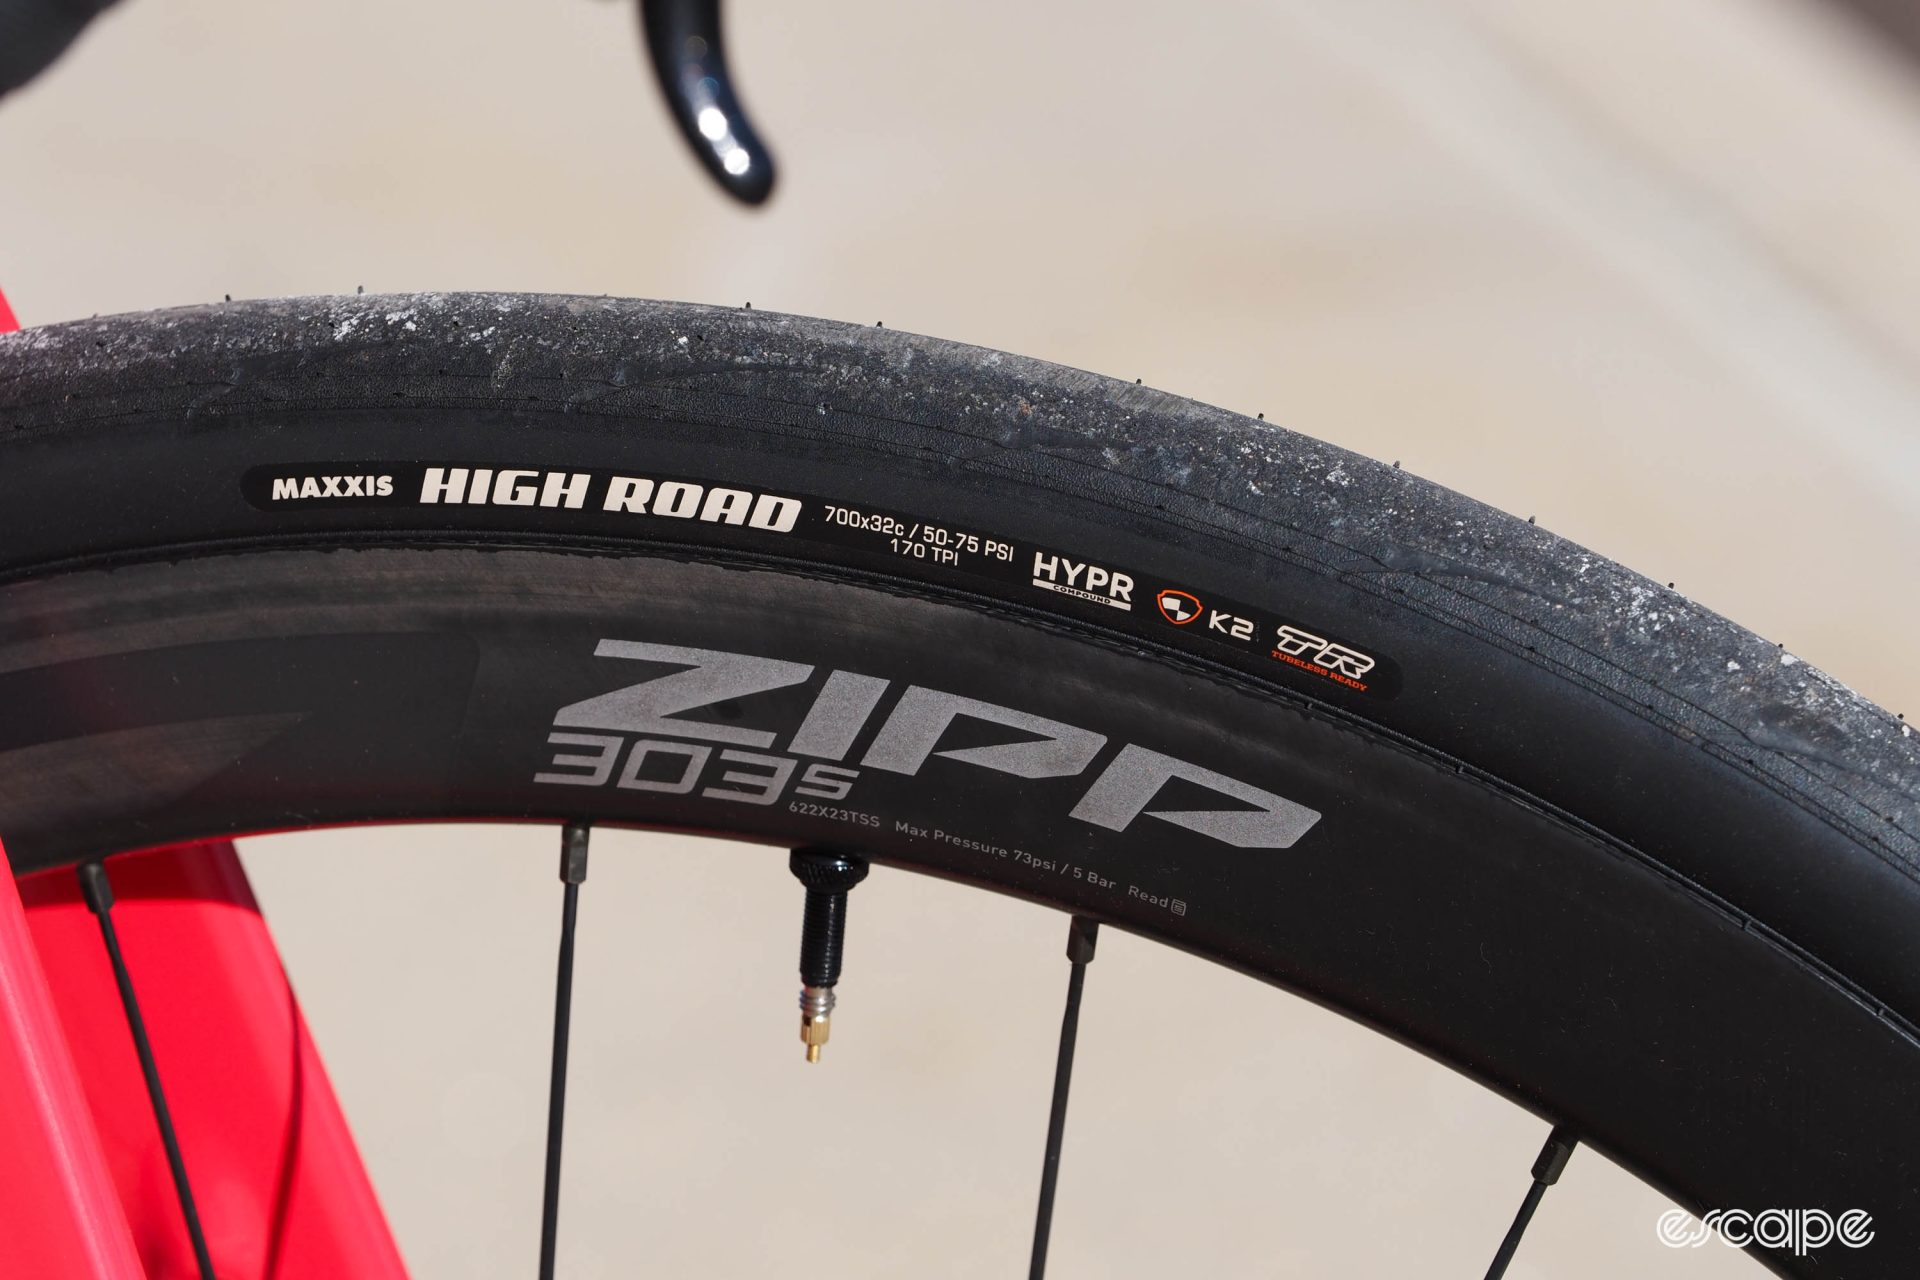 Lauf Uthald Maxxis High Road tires